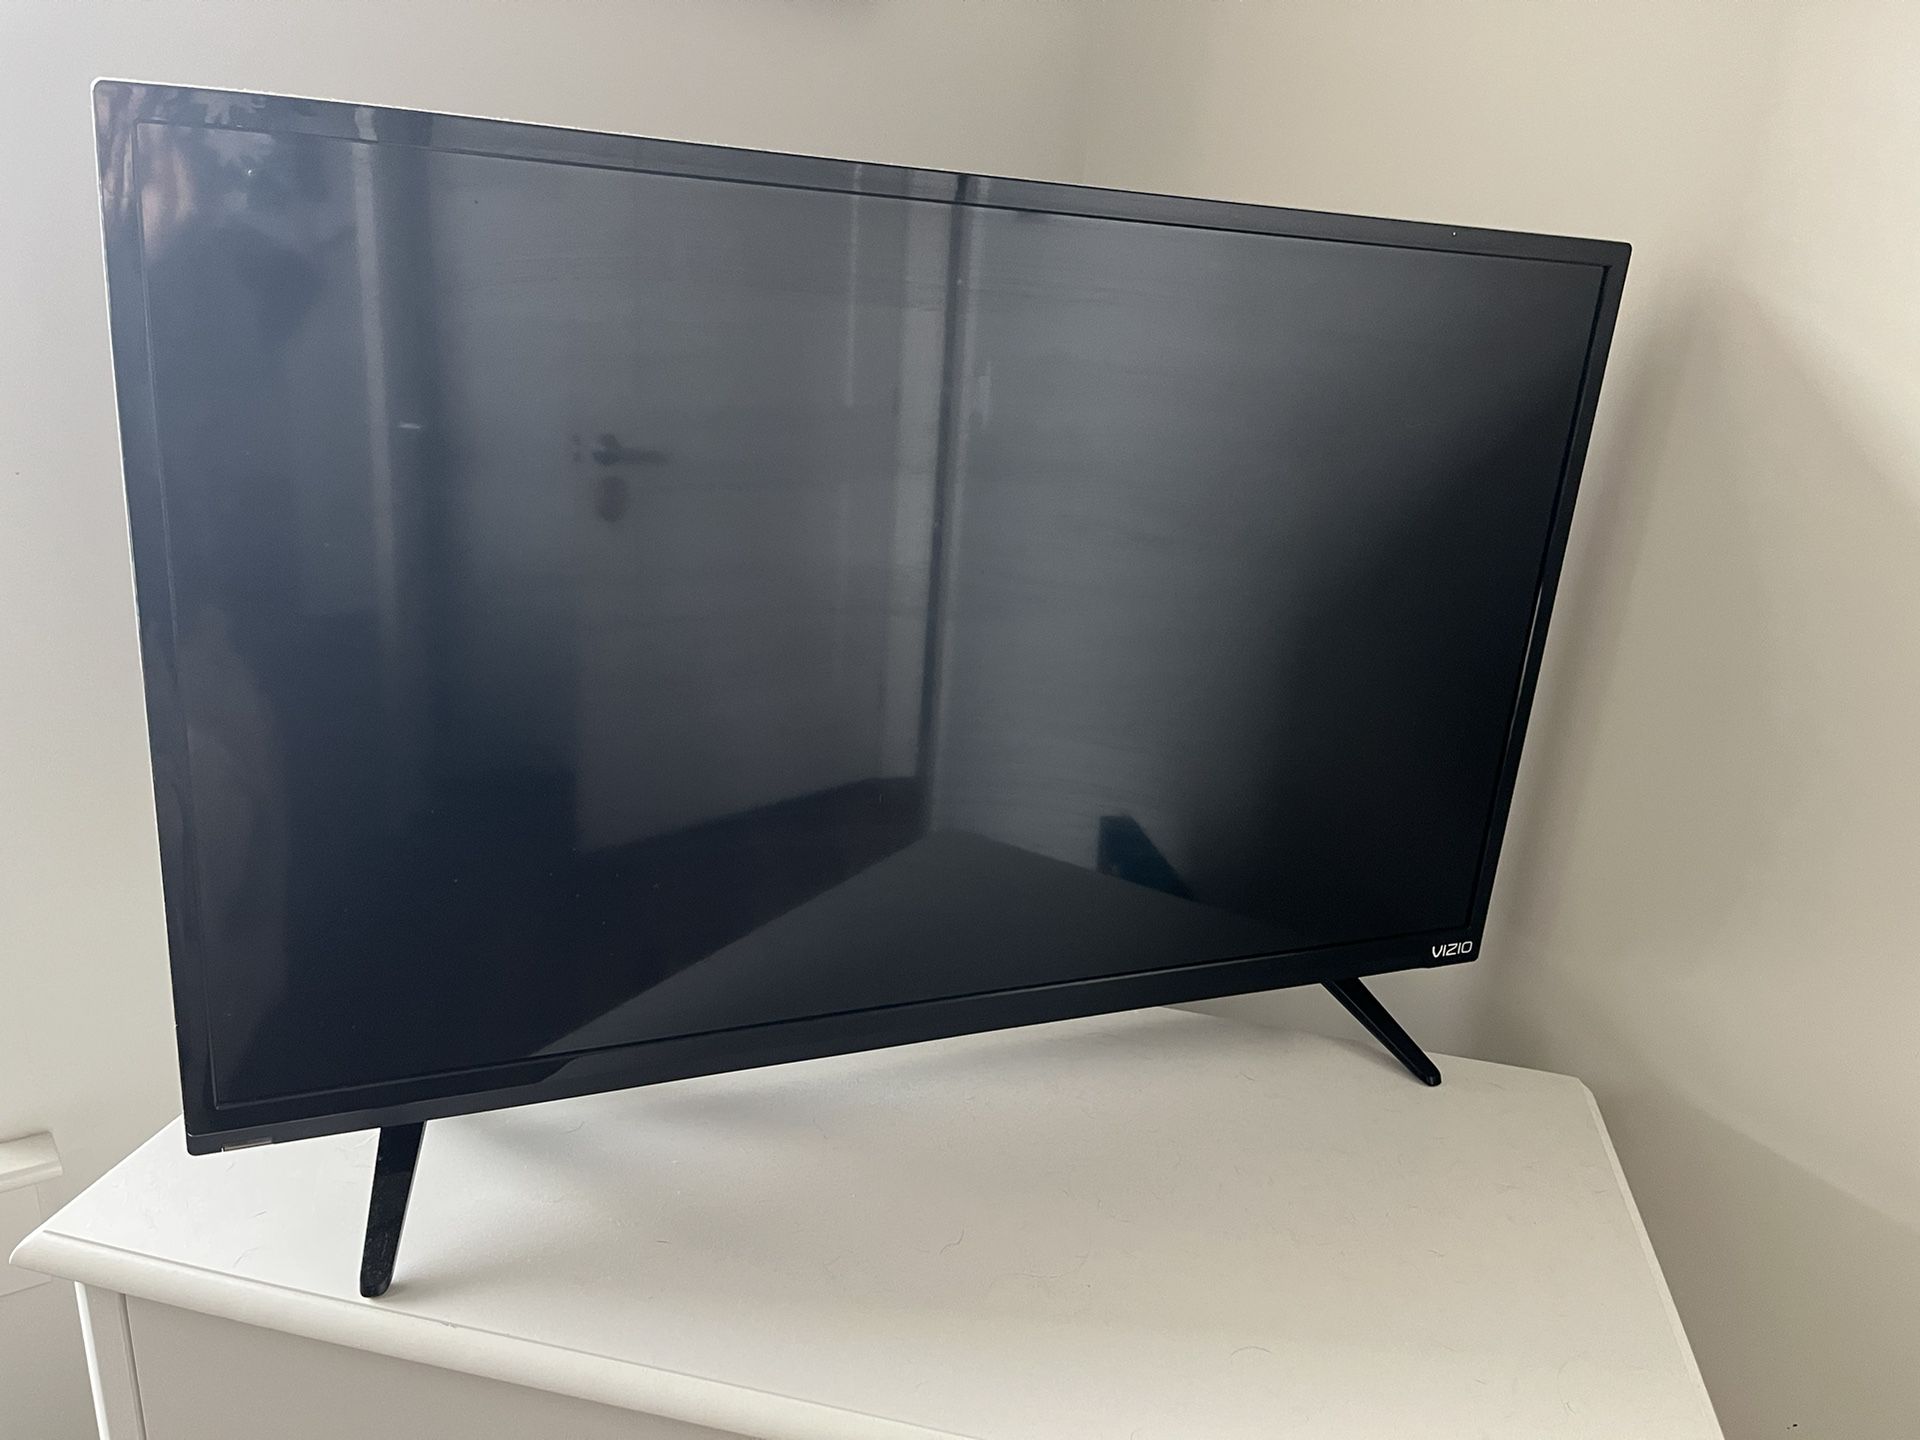 TV 32” Smart TV with Amazon Fire-stick! 